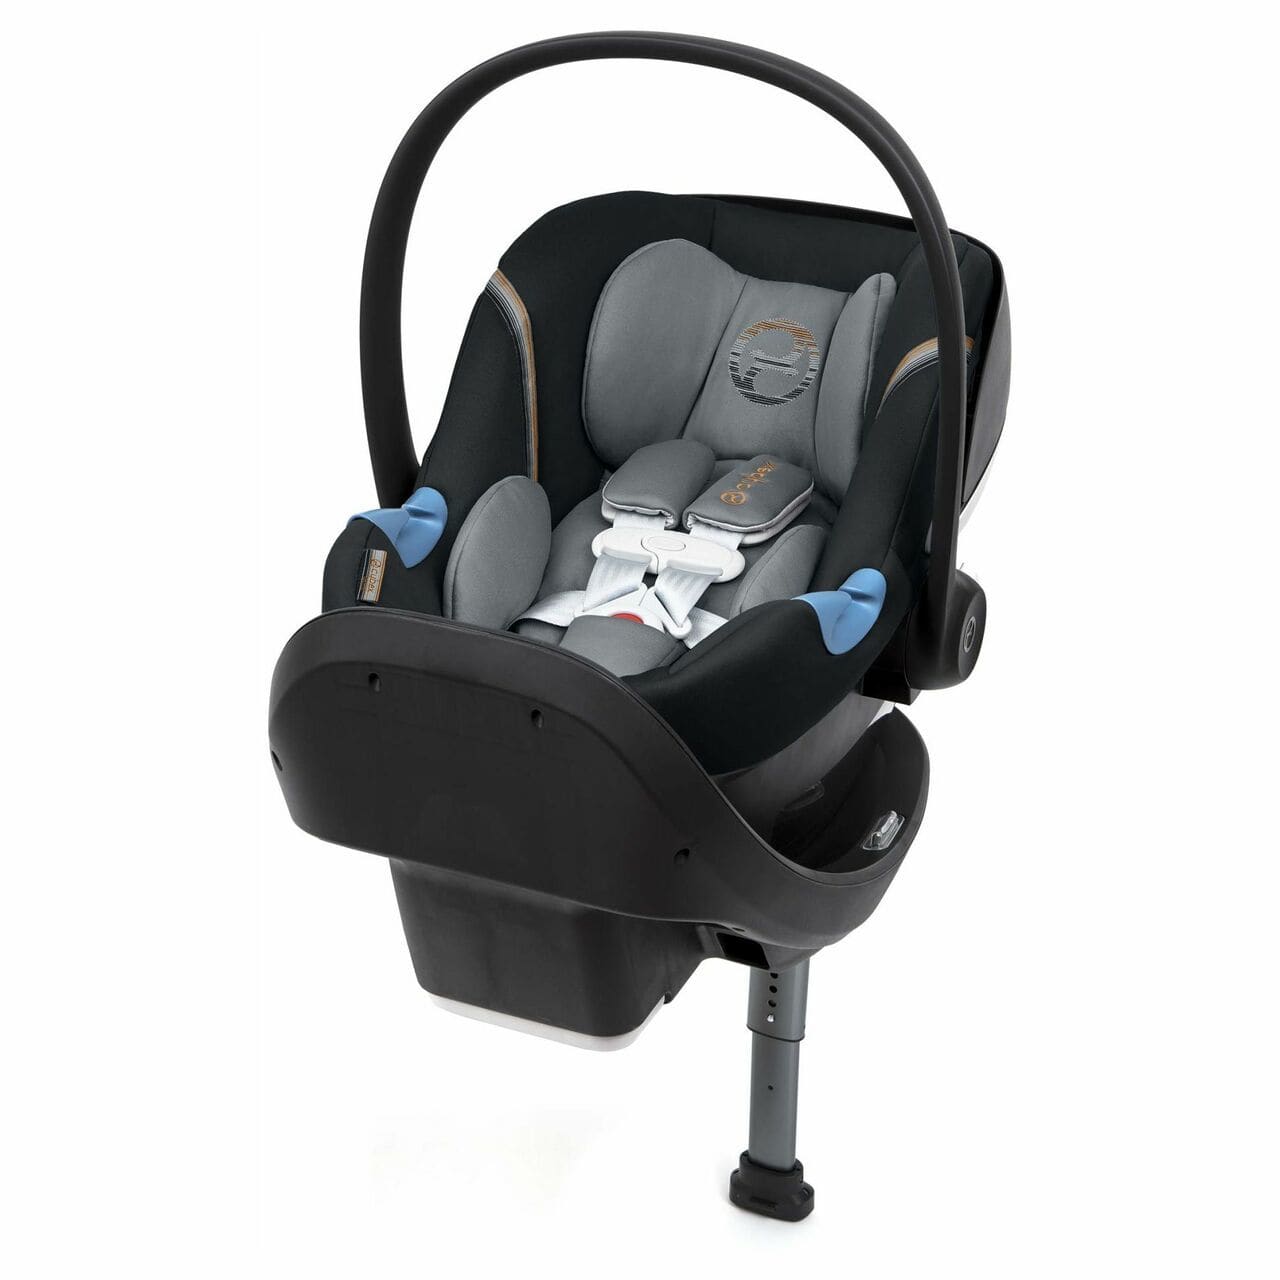 Cybex Aton M Infant Car Seat With SafeLock Base - Pepper Black 518002097 4058511299747